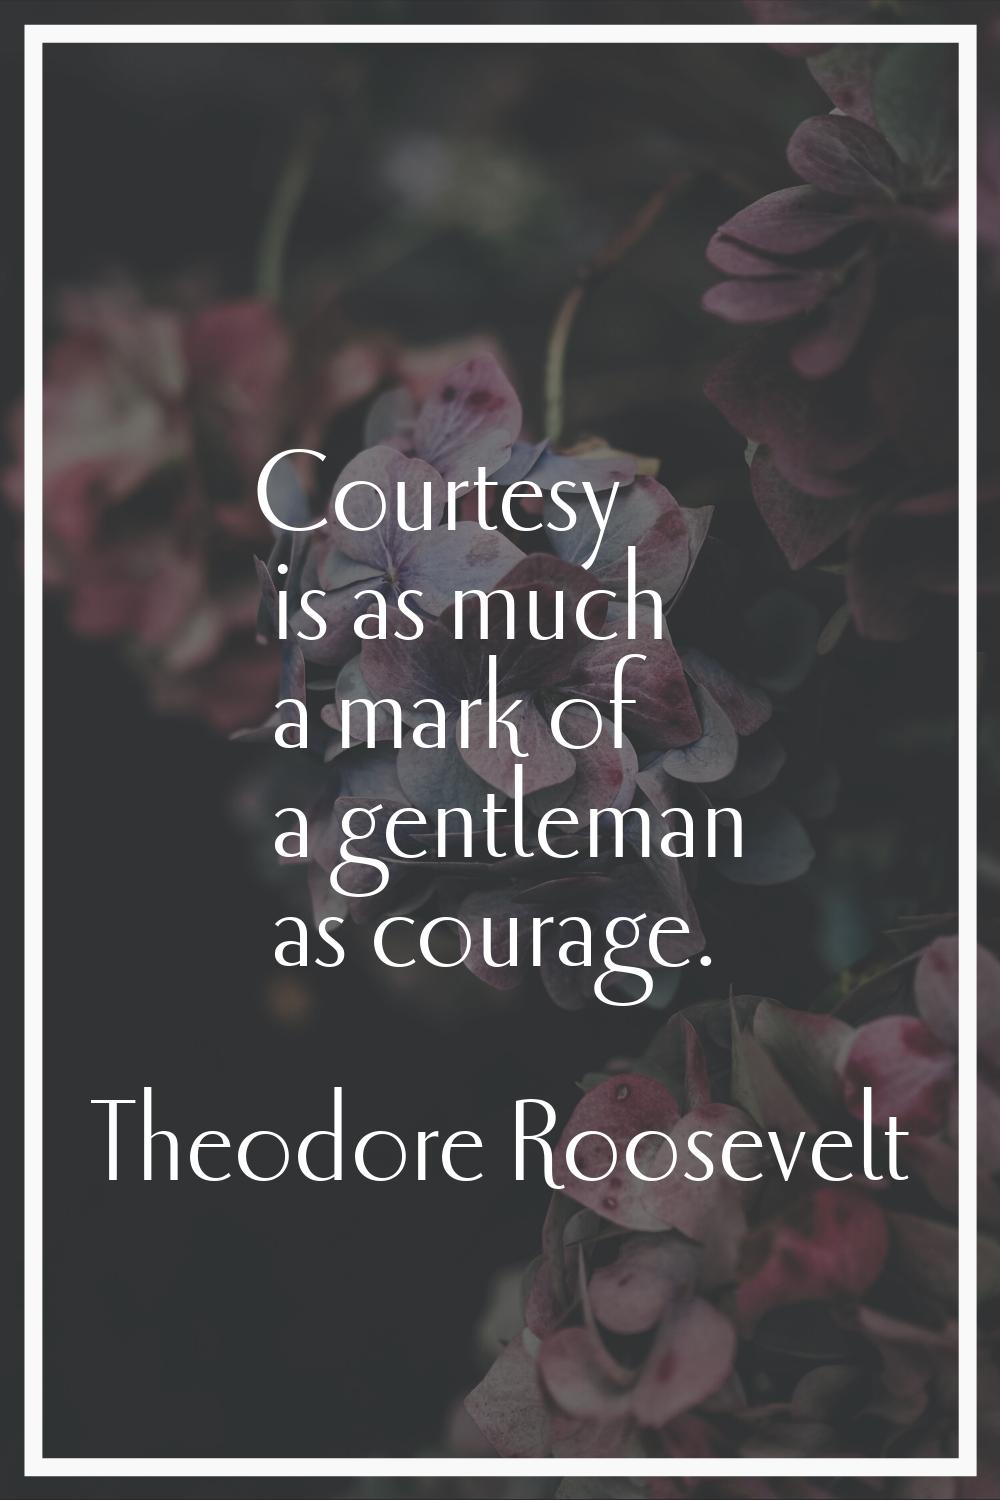 Courtesy is as much a mark of a gentleman as courage.